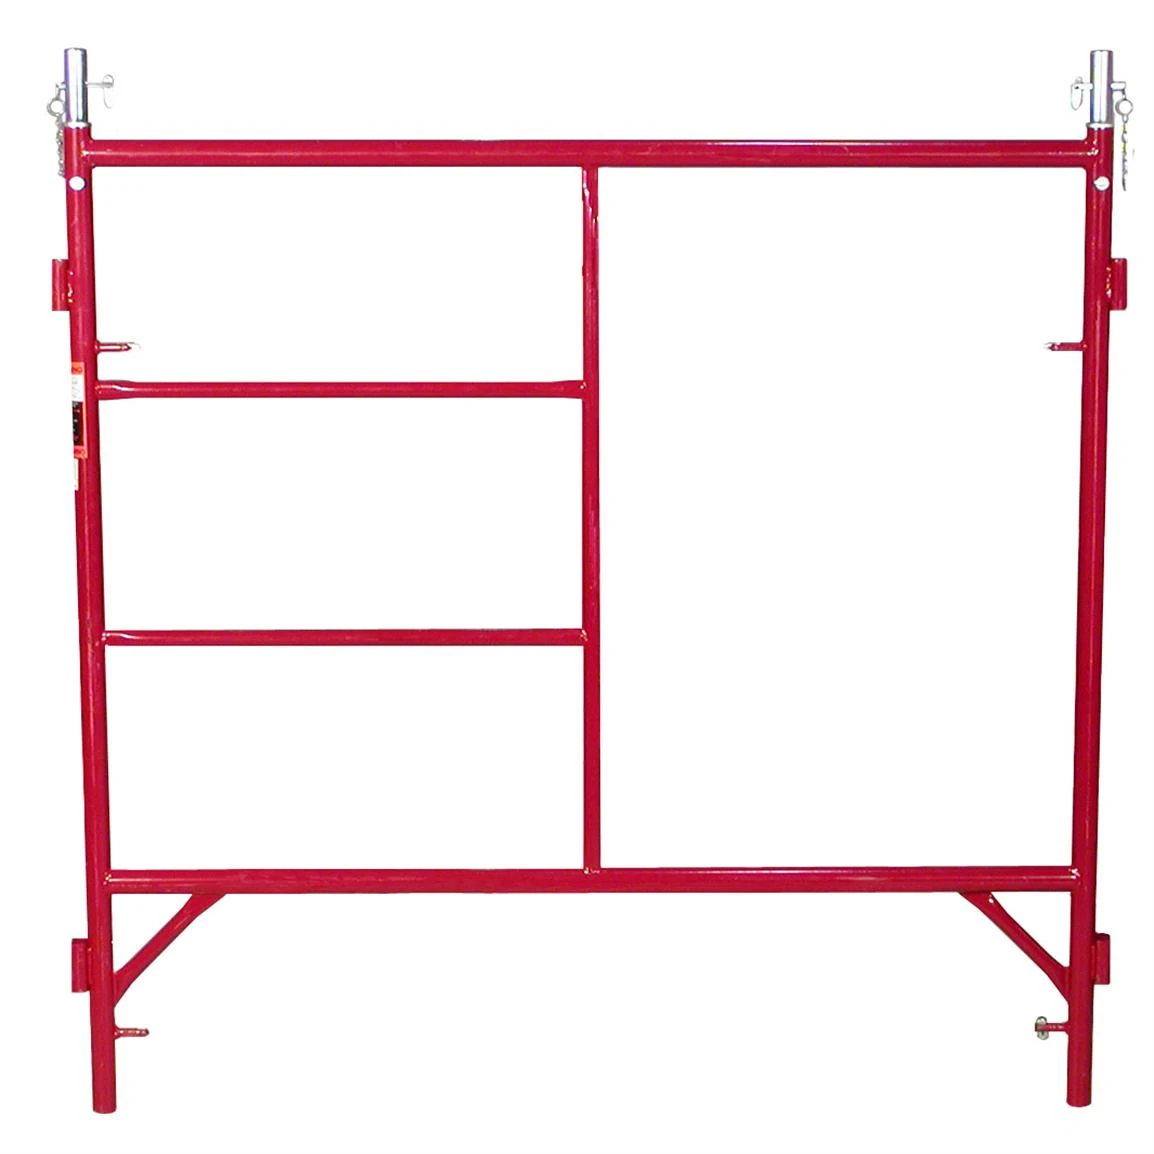 High Quality Scaffolding Speed Lock Steel Frame For Construction metal Mason Ladder Frame used for building